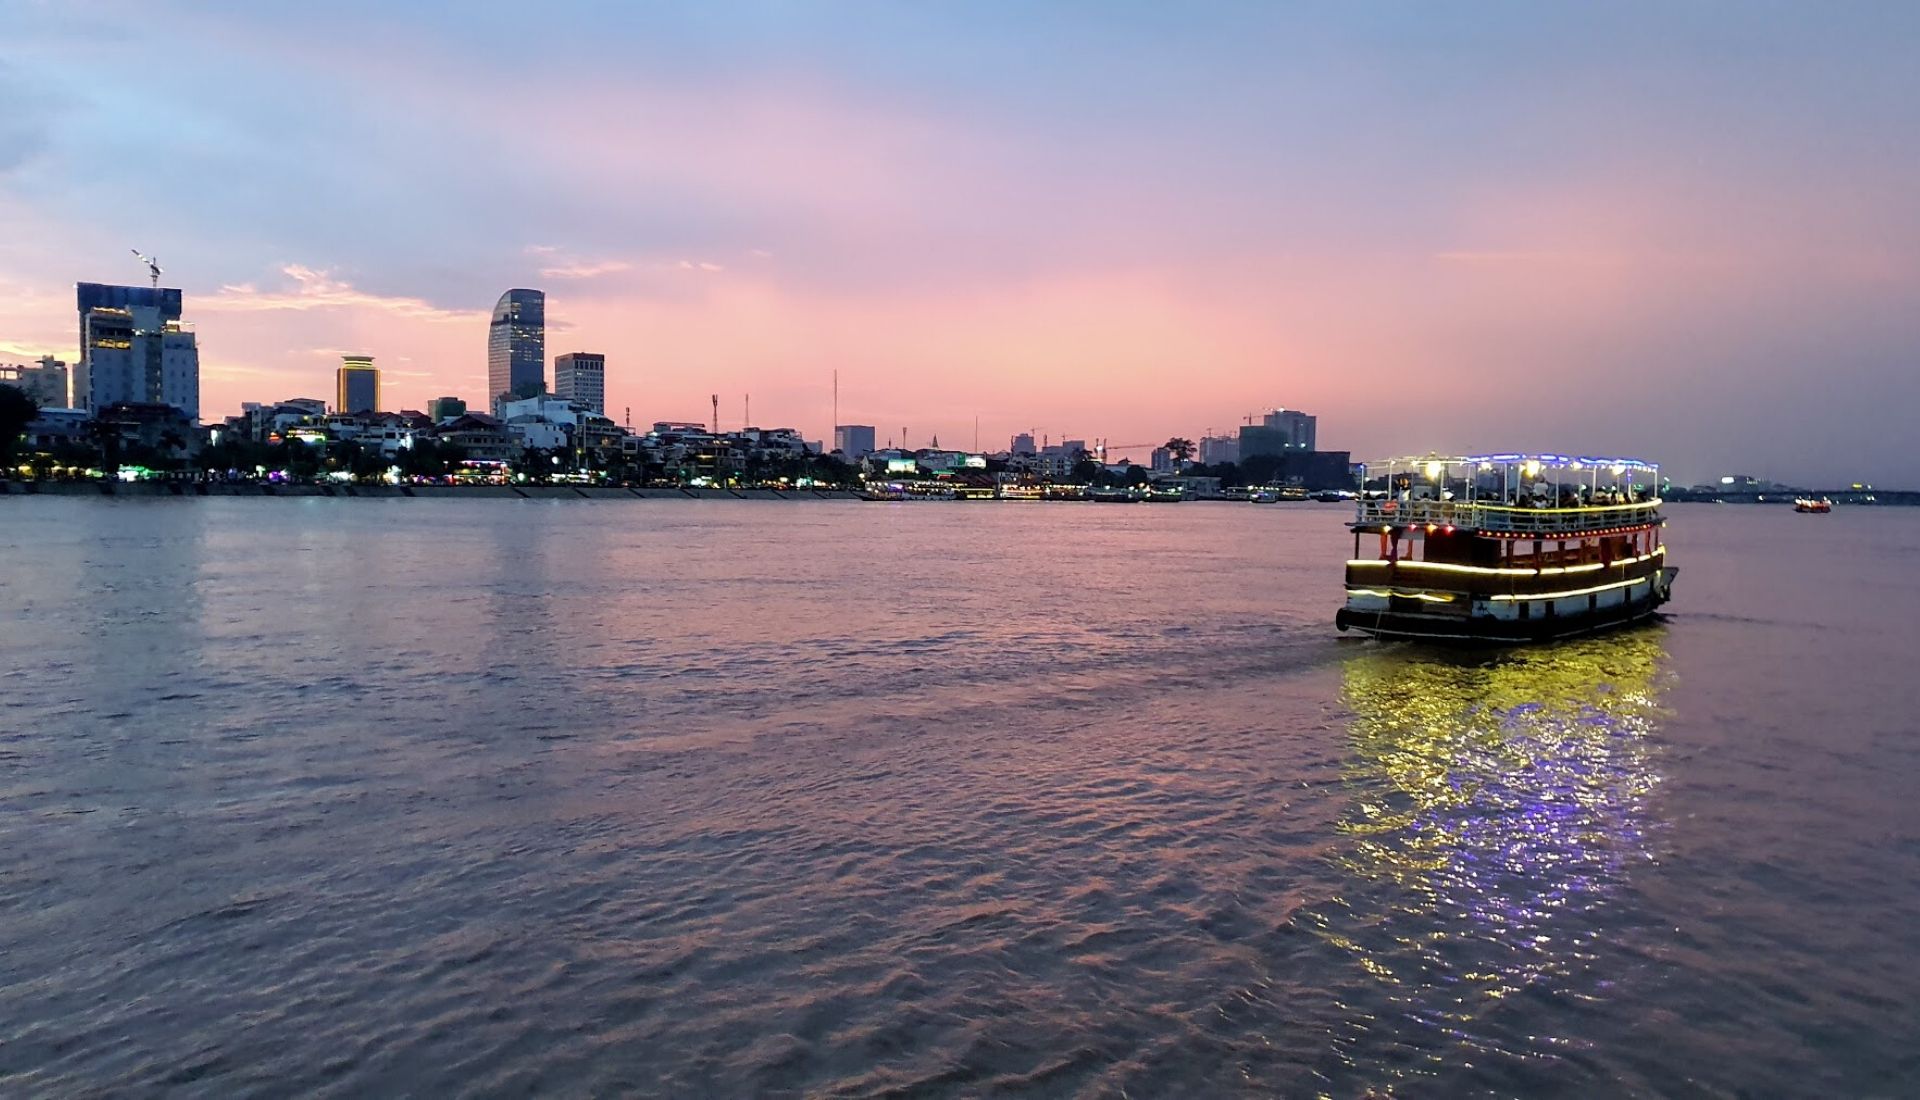 Evening Cruise on Tonle Sap River